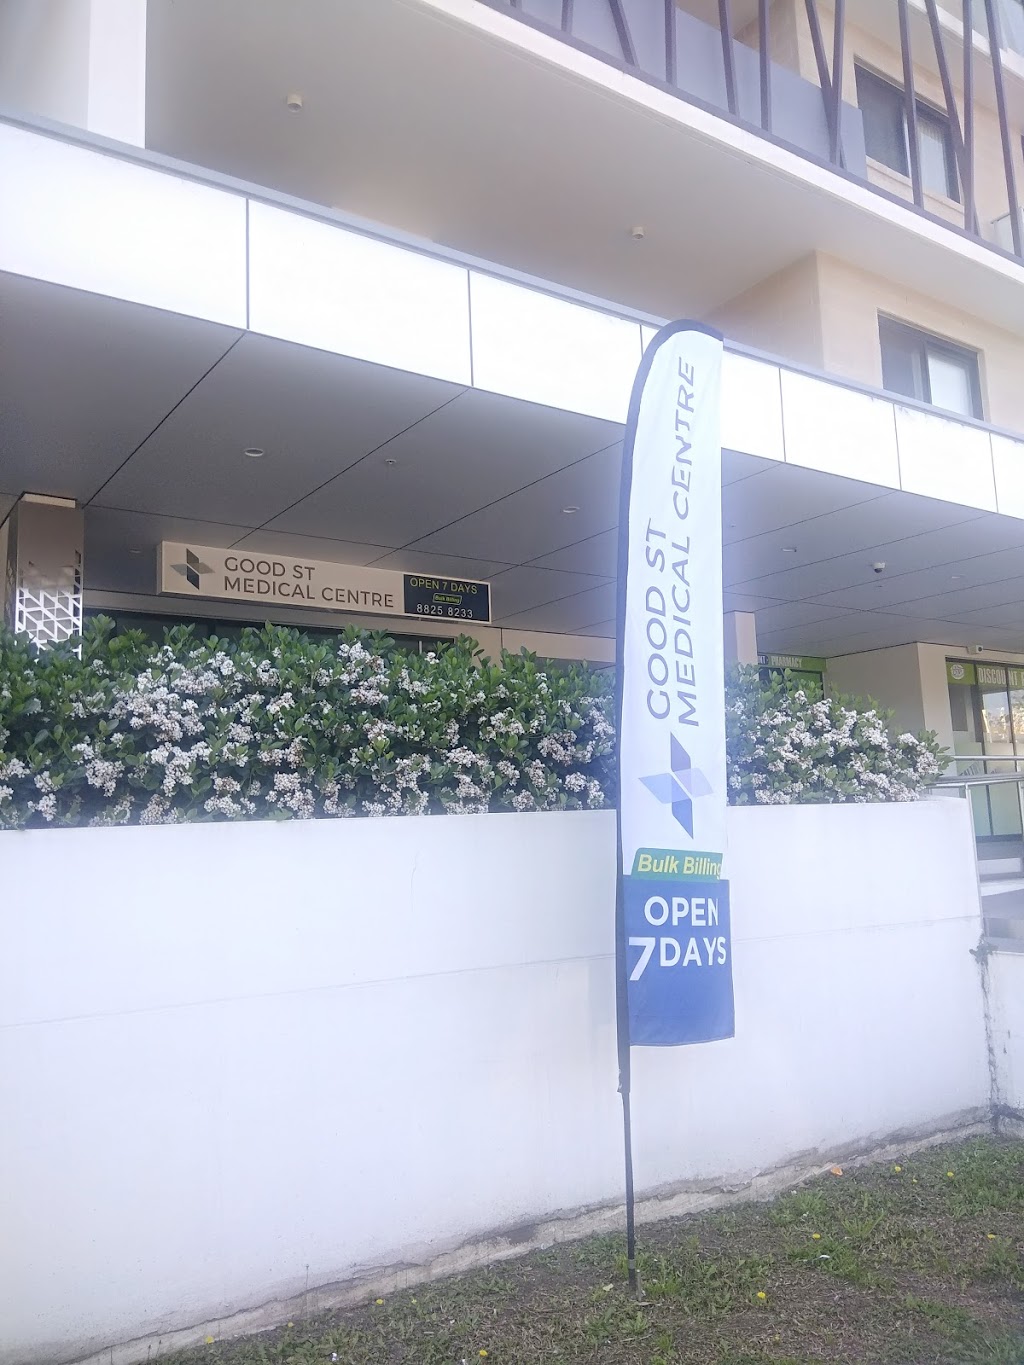 Good St Medical Centre | hospital | Suite 1/3, 2 Good St, Westmead NSW 2145, Australia | 0288258233 OR +61 2 8825 8233